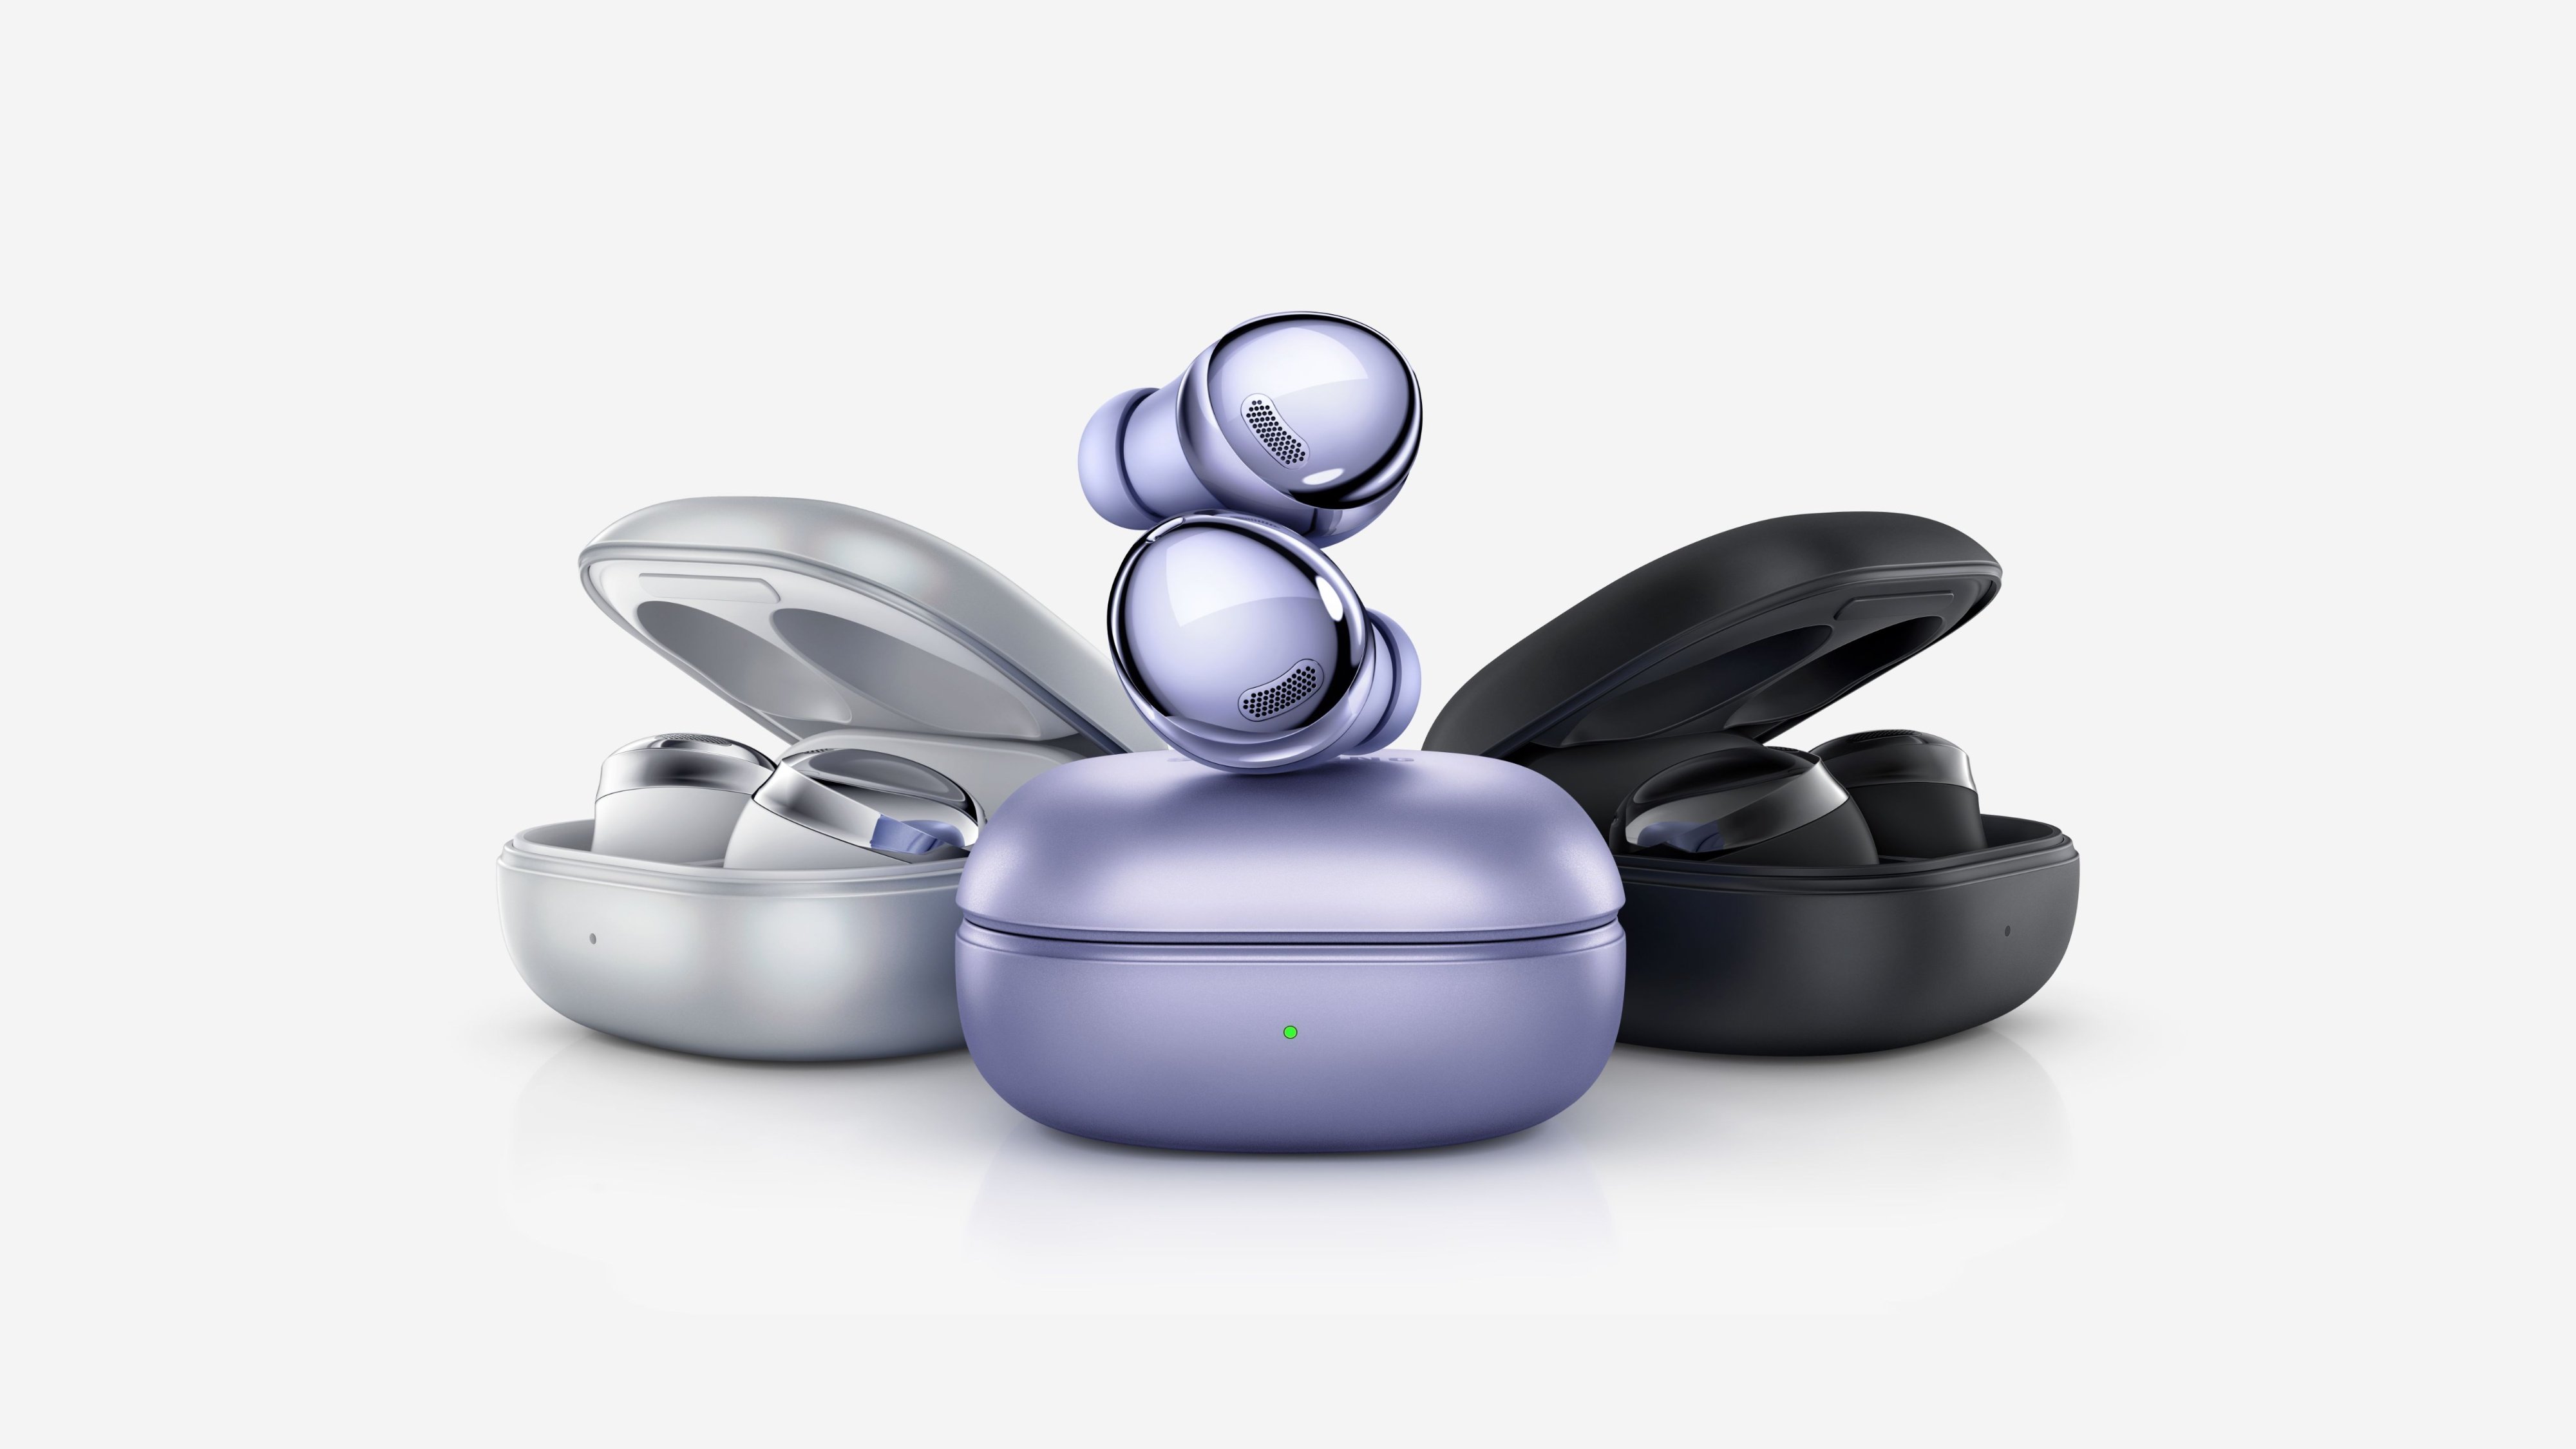 Samsung's new Galaxy Buds Pro has a new update that brings hearing aid functionality - Gizmochina